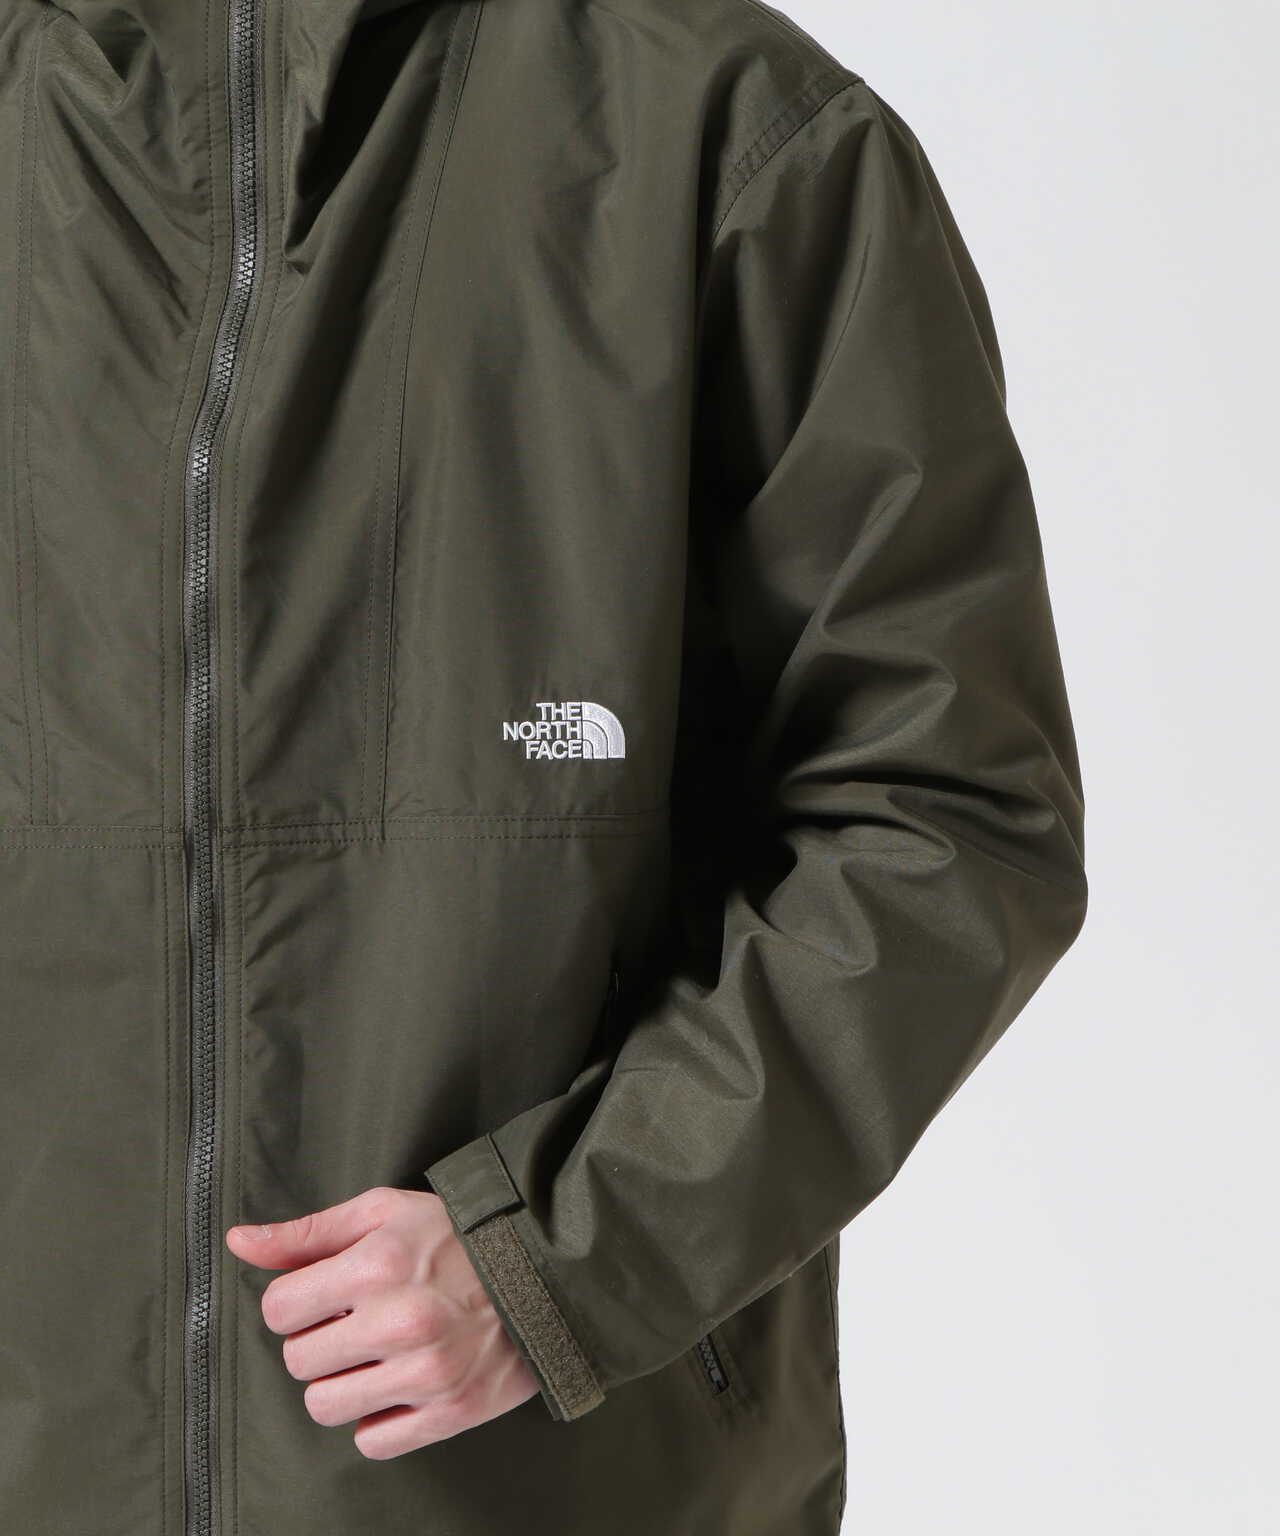 THE NORTH FACE (ノースフェイス)Compact Jacket NP72230 | B'2nd